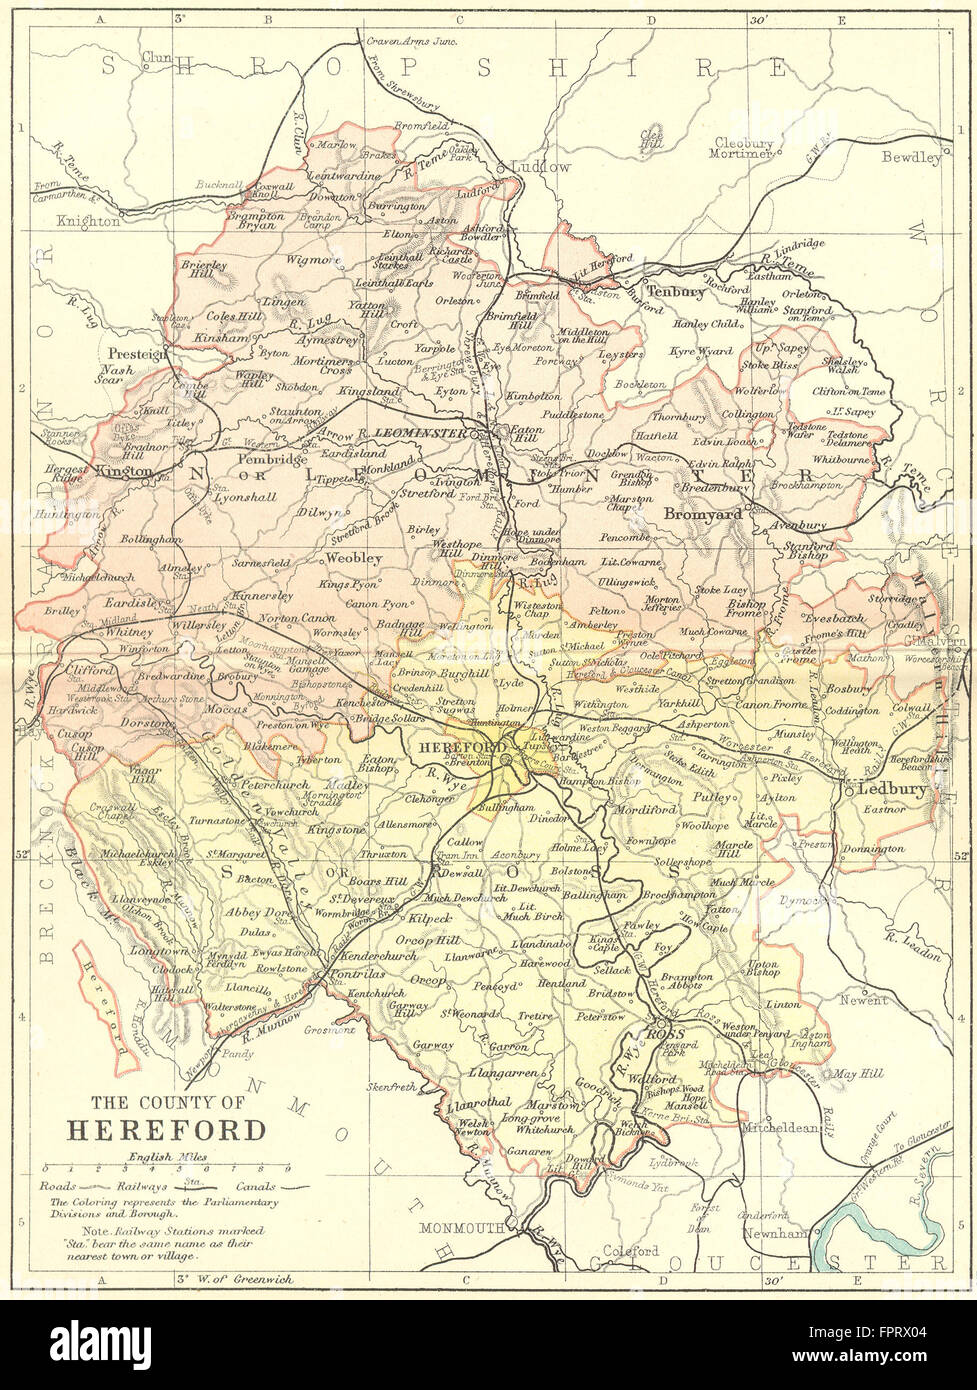 HEREFORD: Philip, 1898 antique map Stock Photo